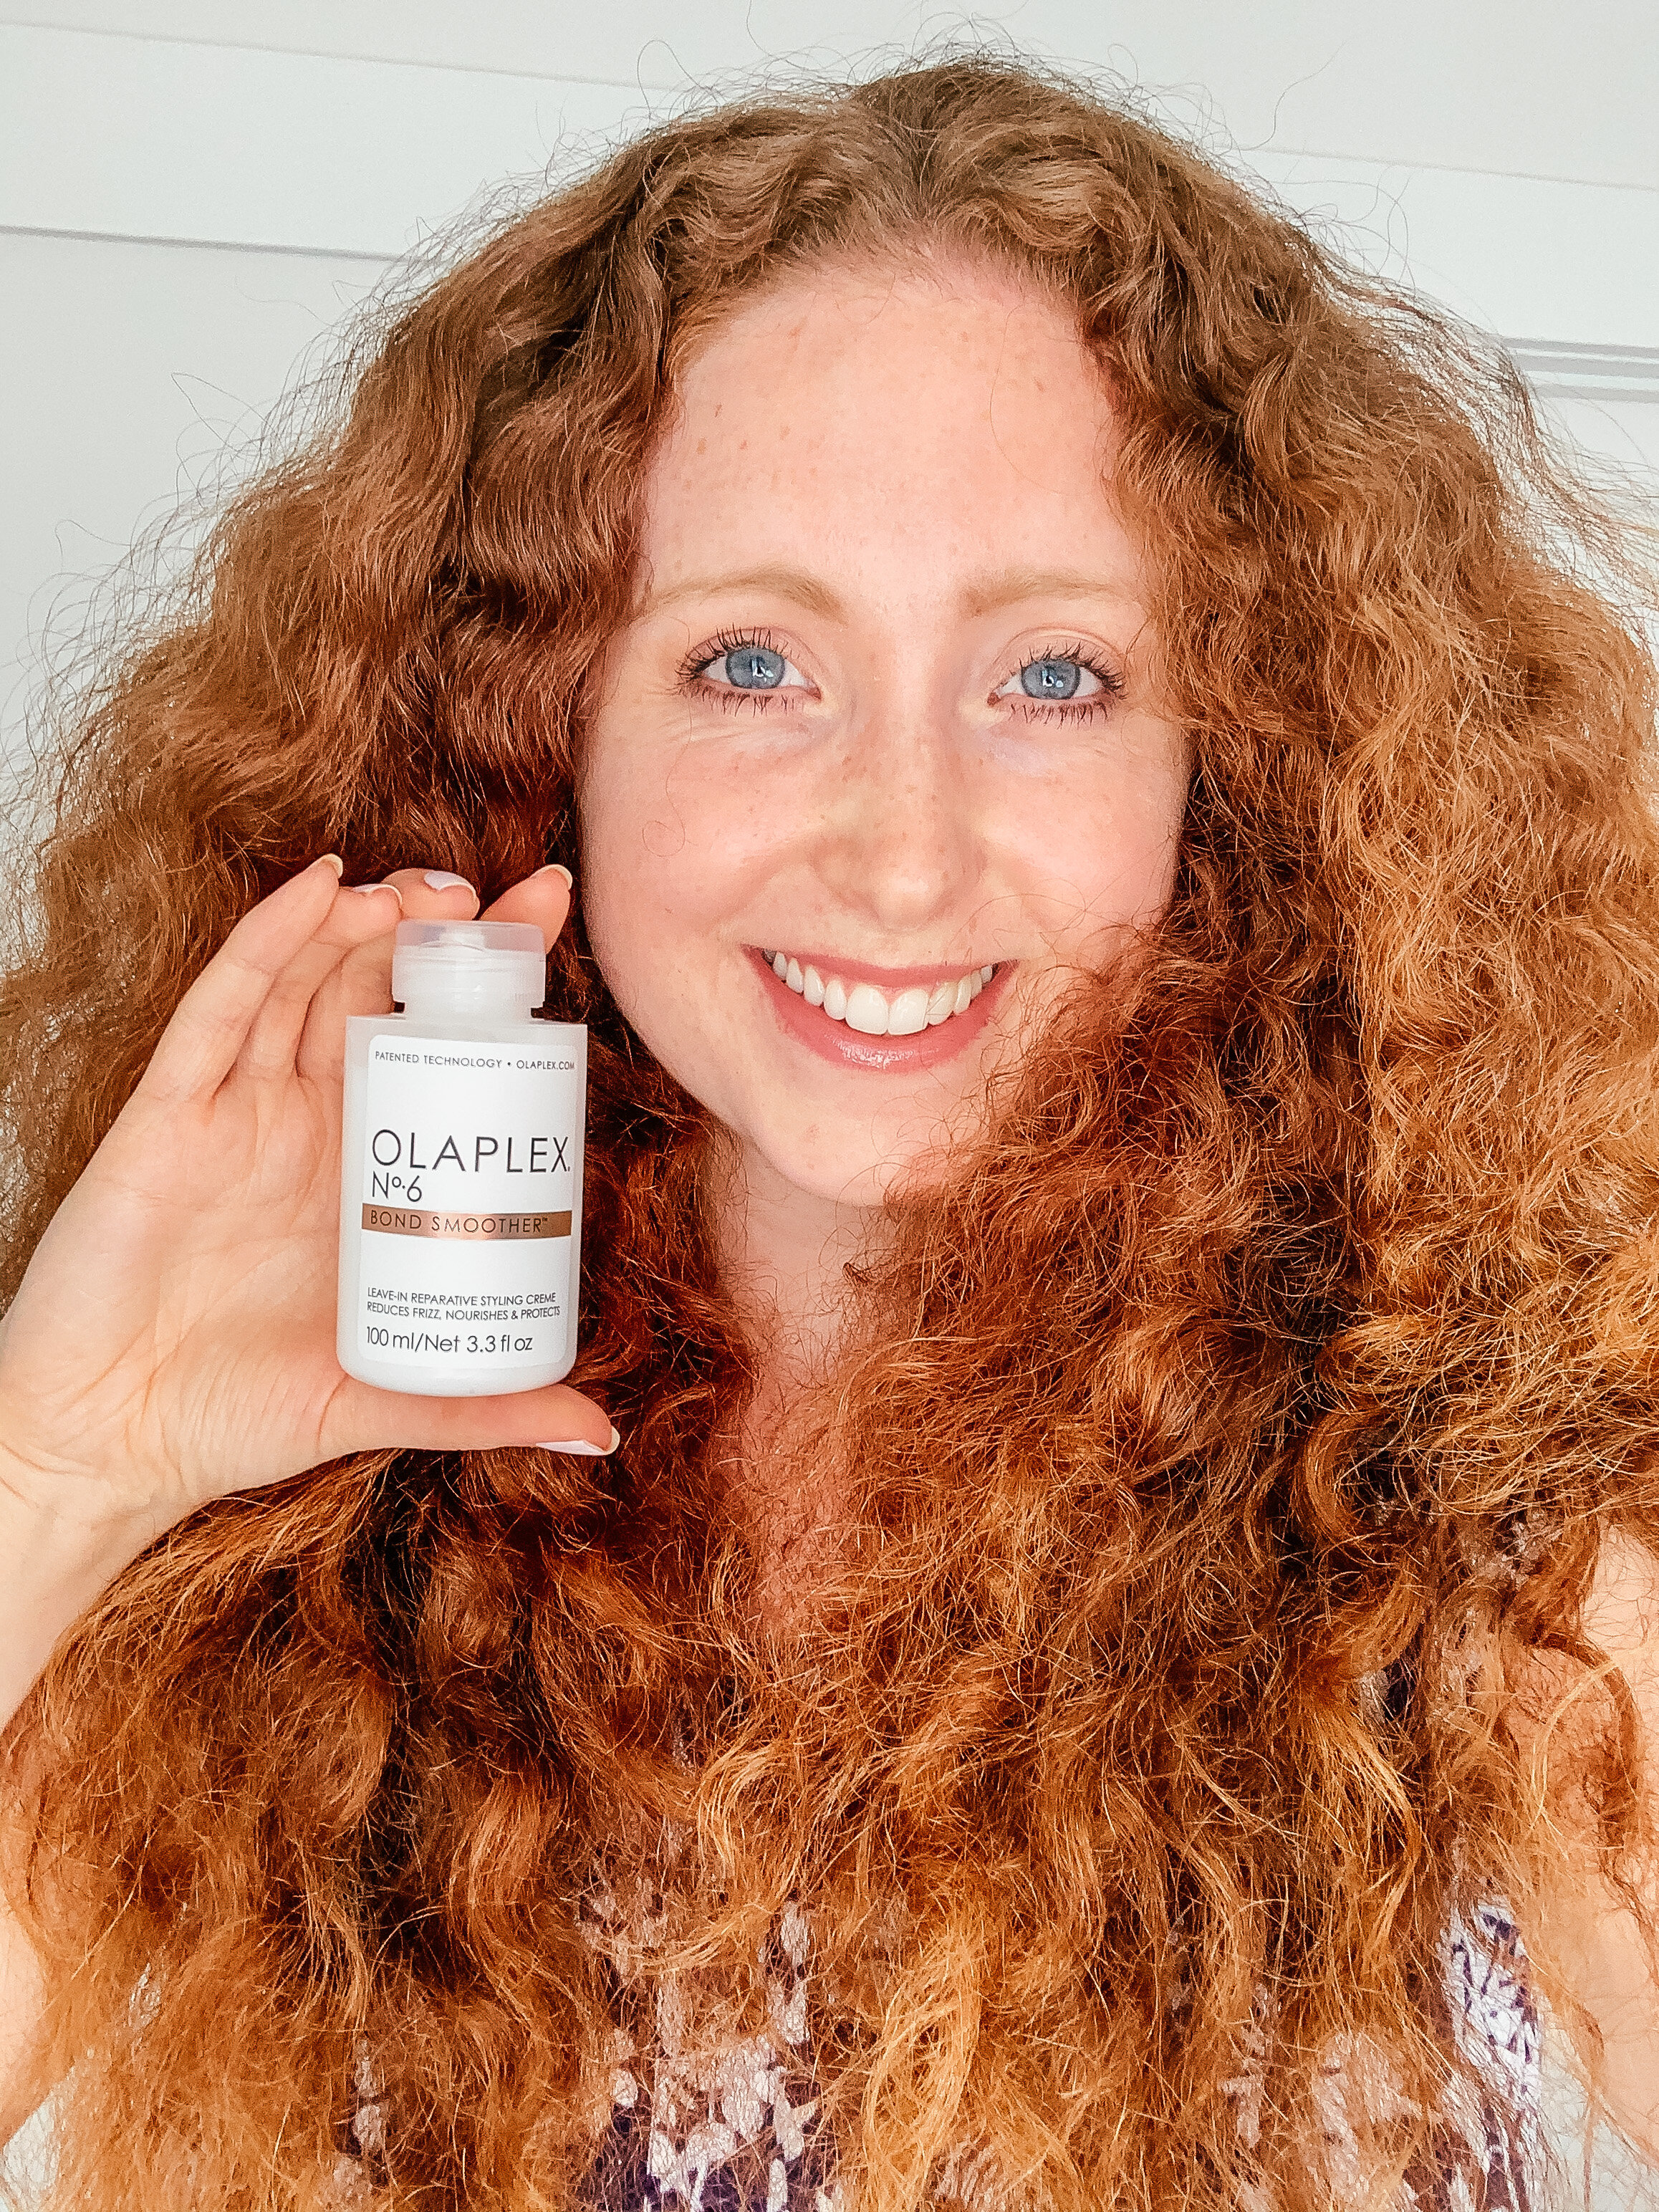 In this Olaplex blog post, I am going to tell you about Olaplex 3, Olaplex 6 and give you all the details on Olaplex 3 vs 6. There are so many Olaplex products that it can be confusing to know the best olaplex for damaged hair or which Olaplex is the